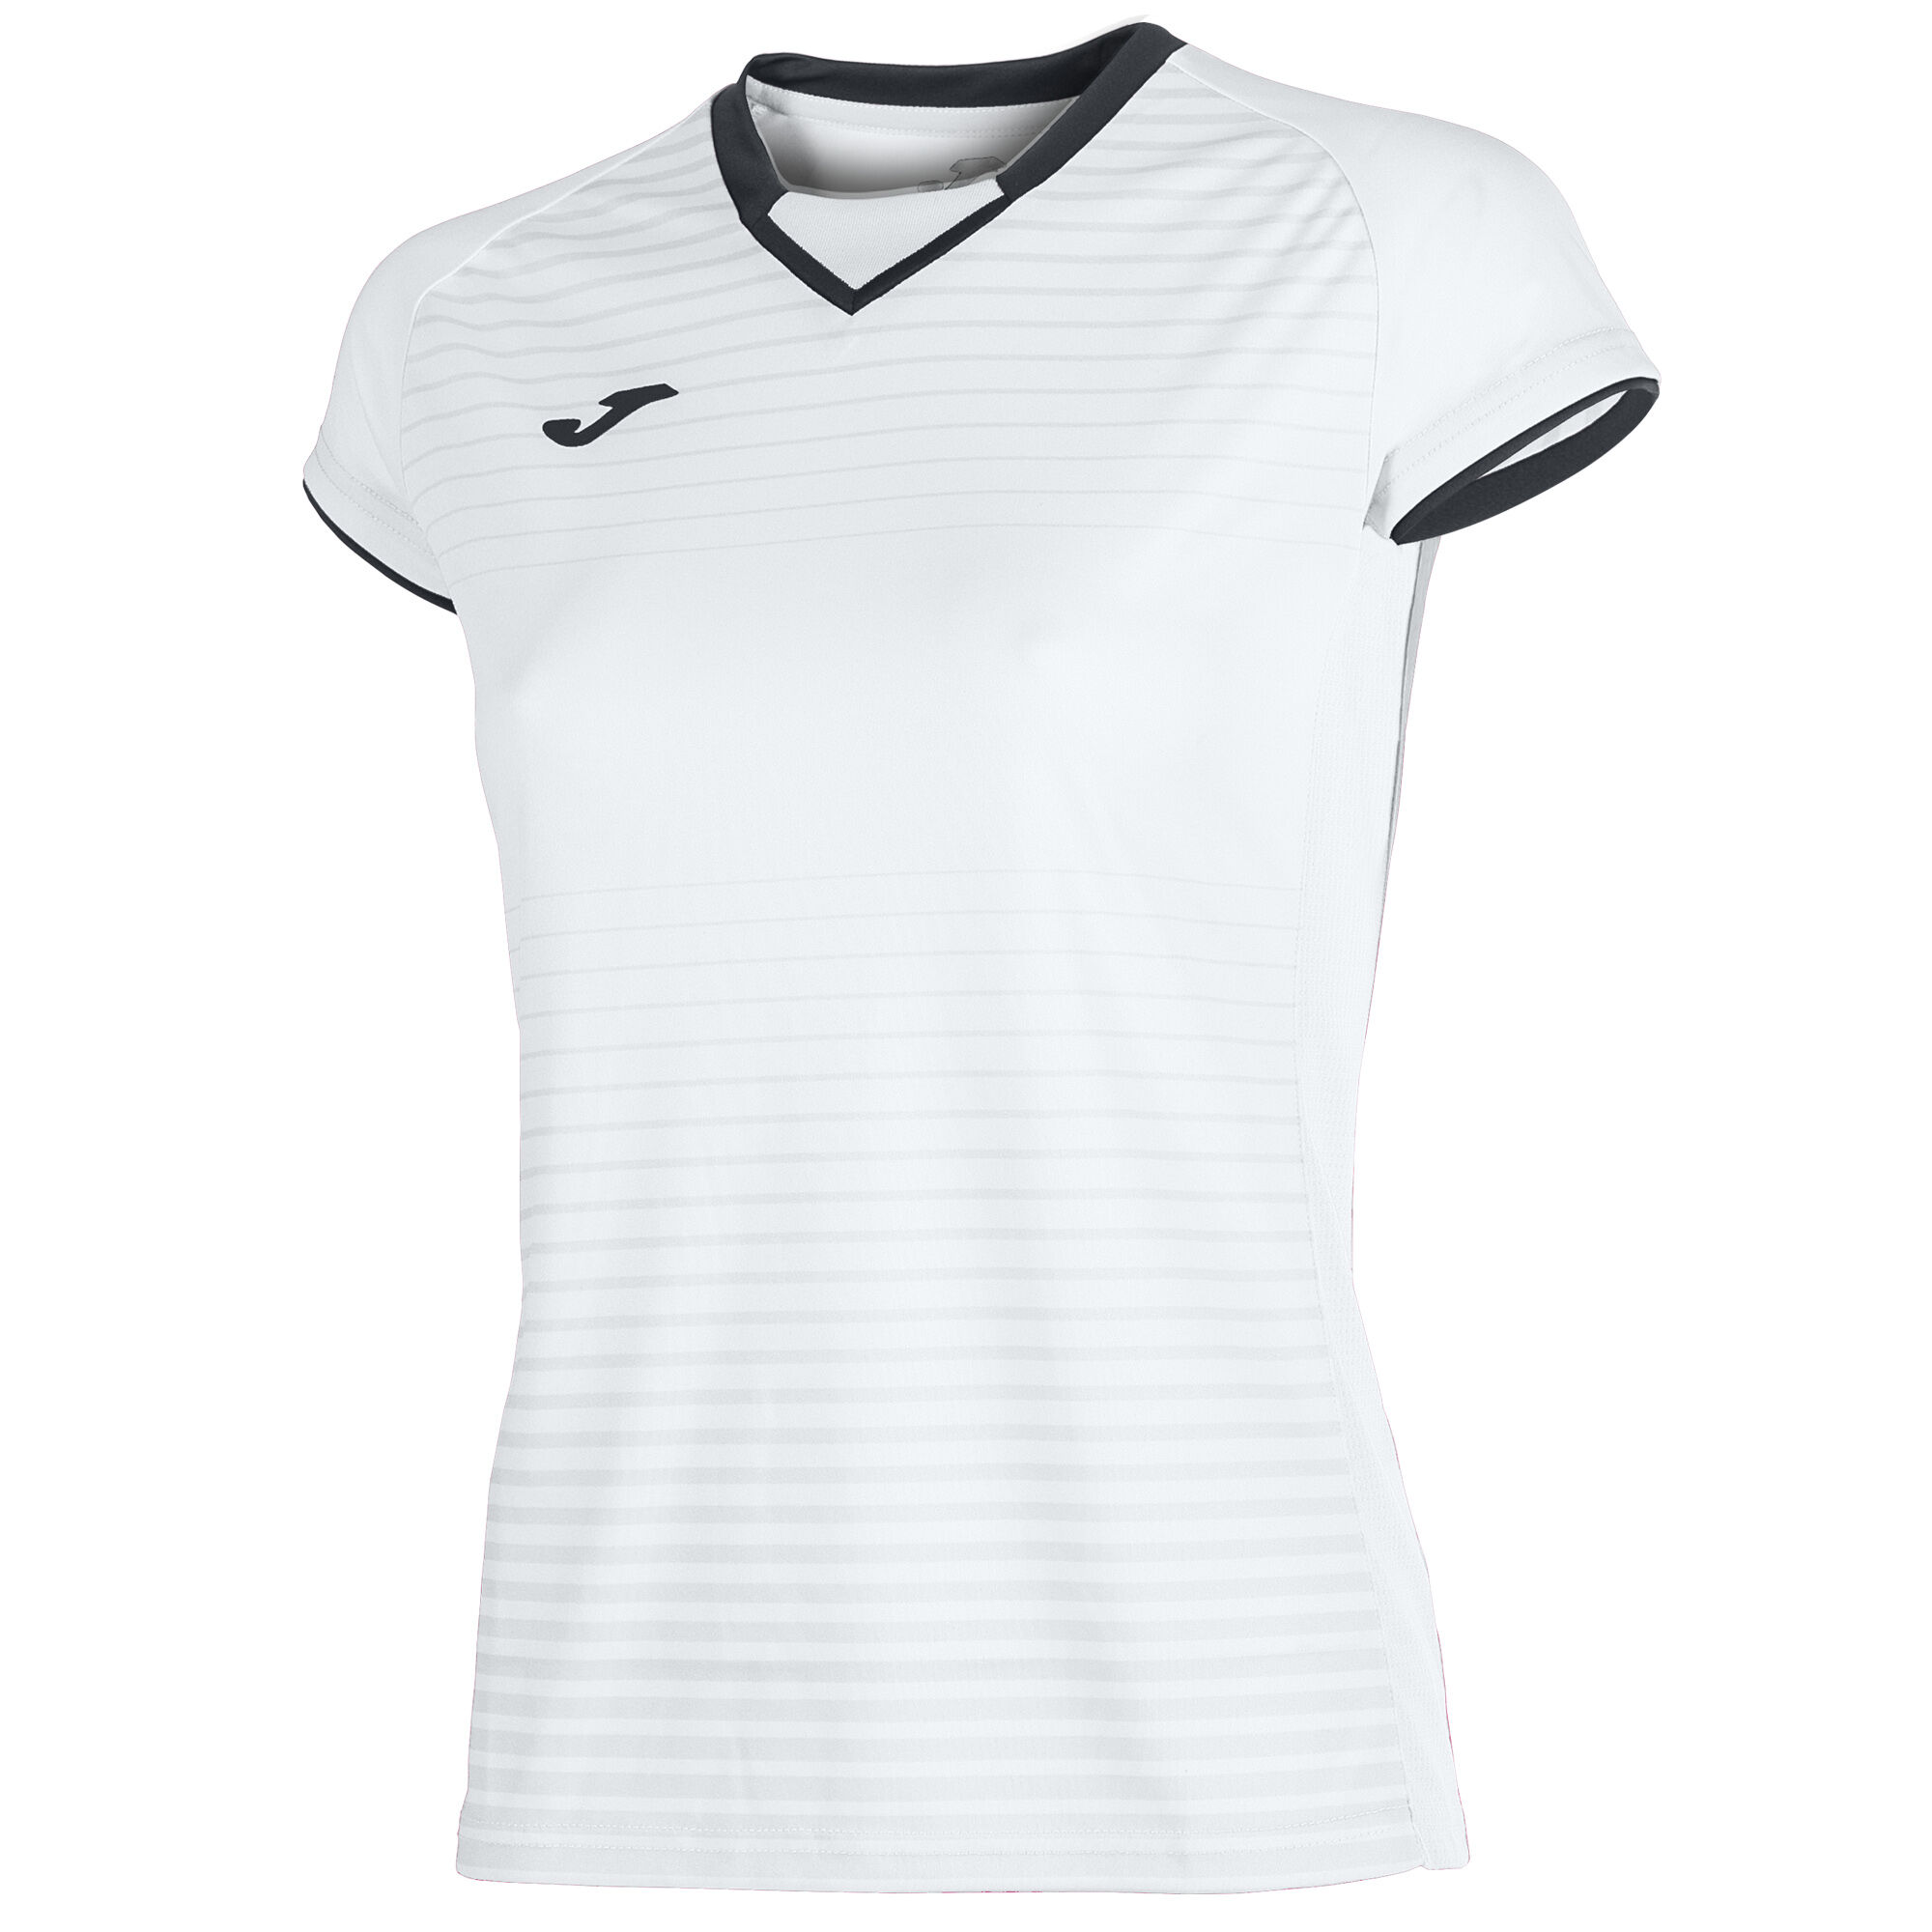 MAILLOT MANCHES COURTES FEMME GALAXY BLANC